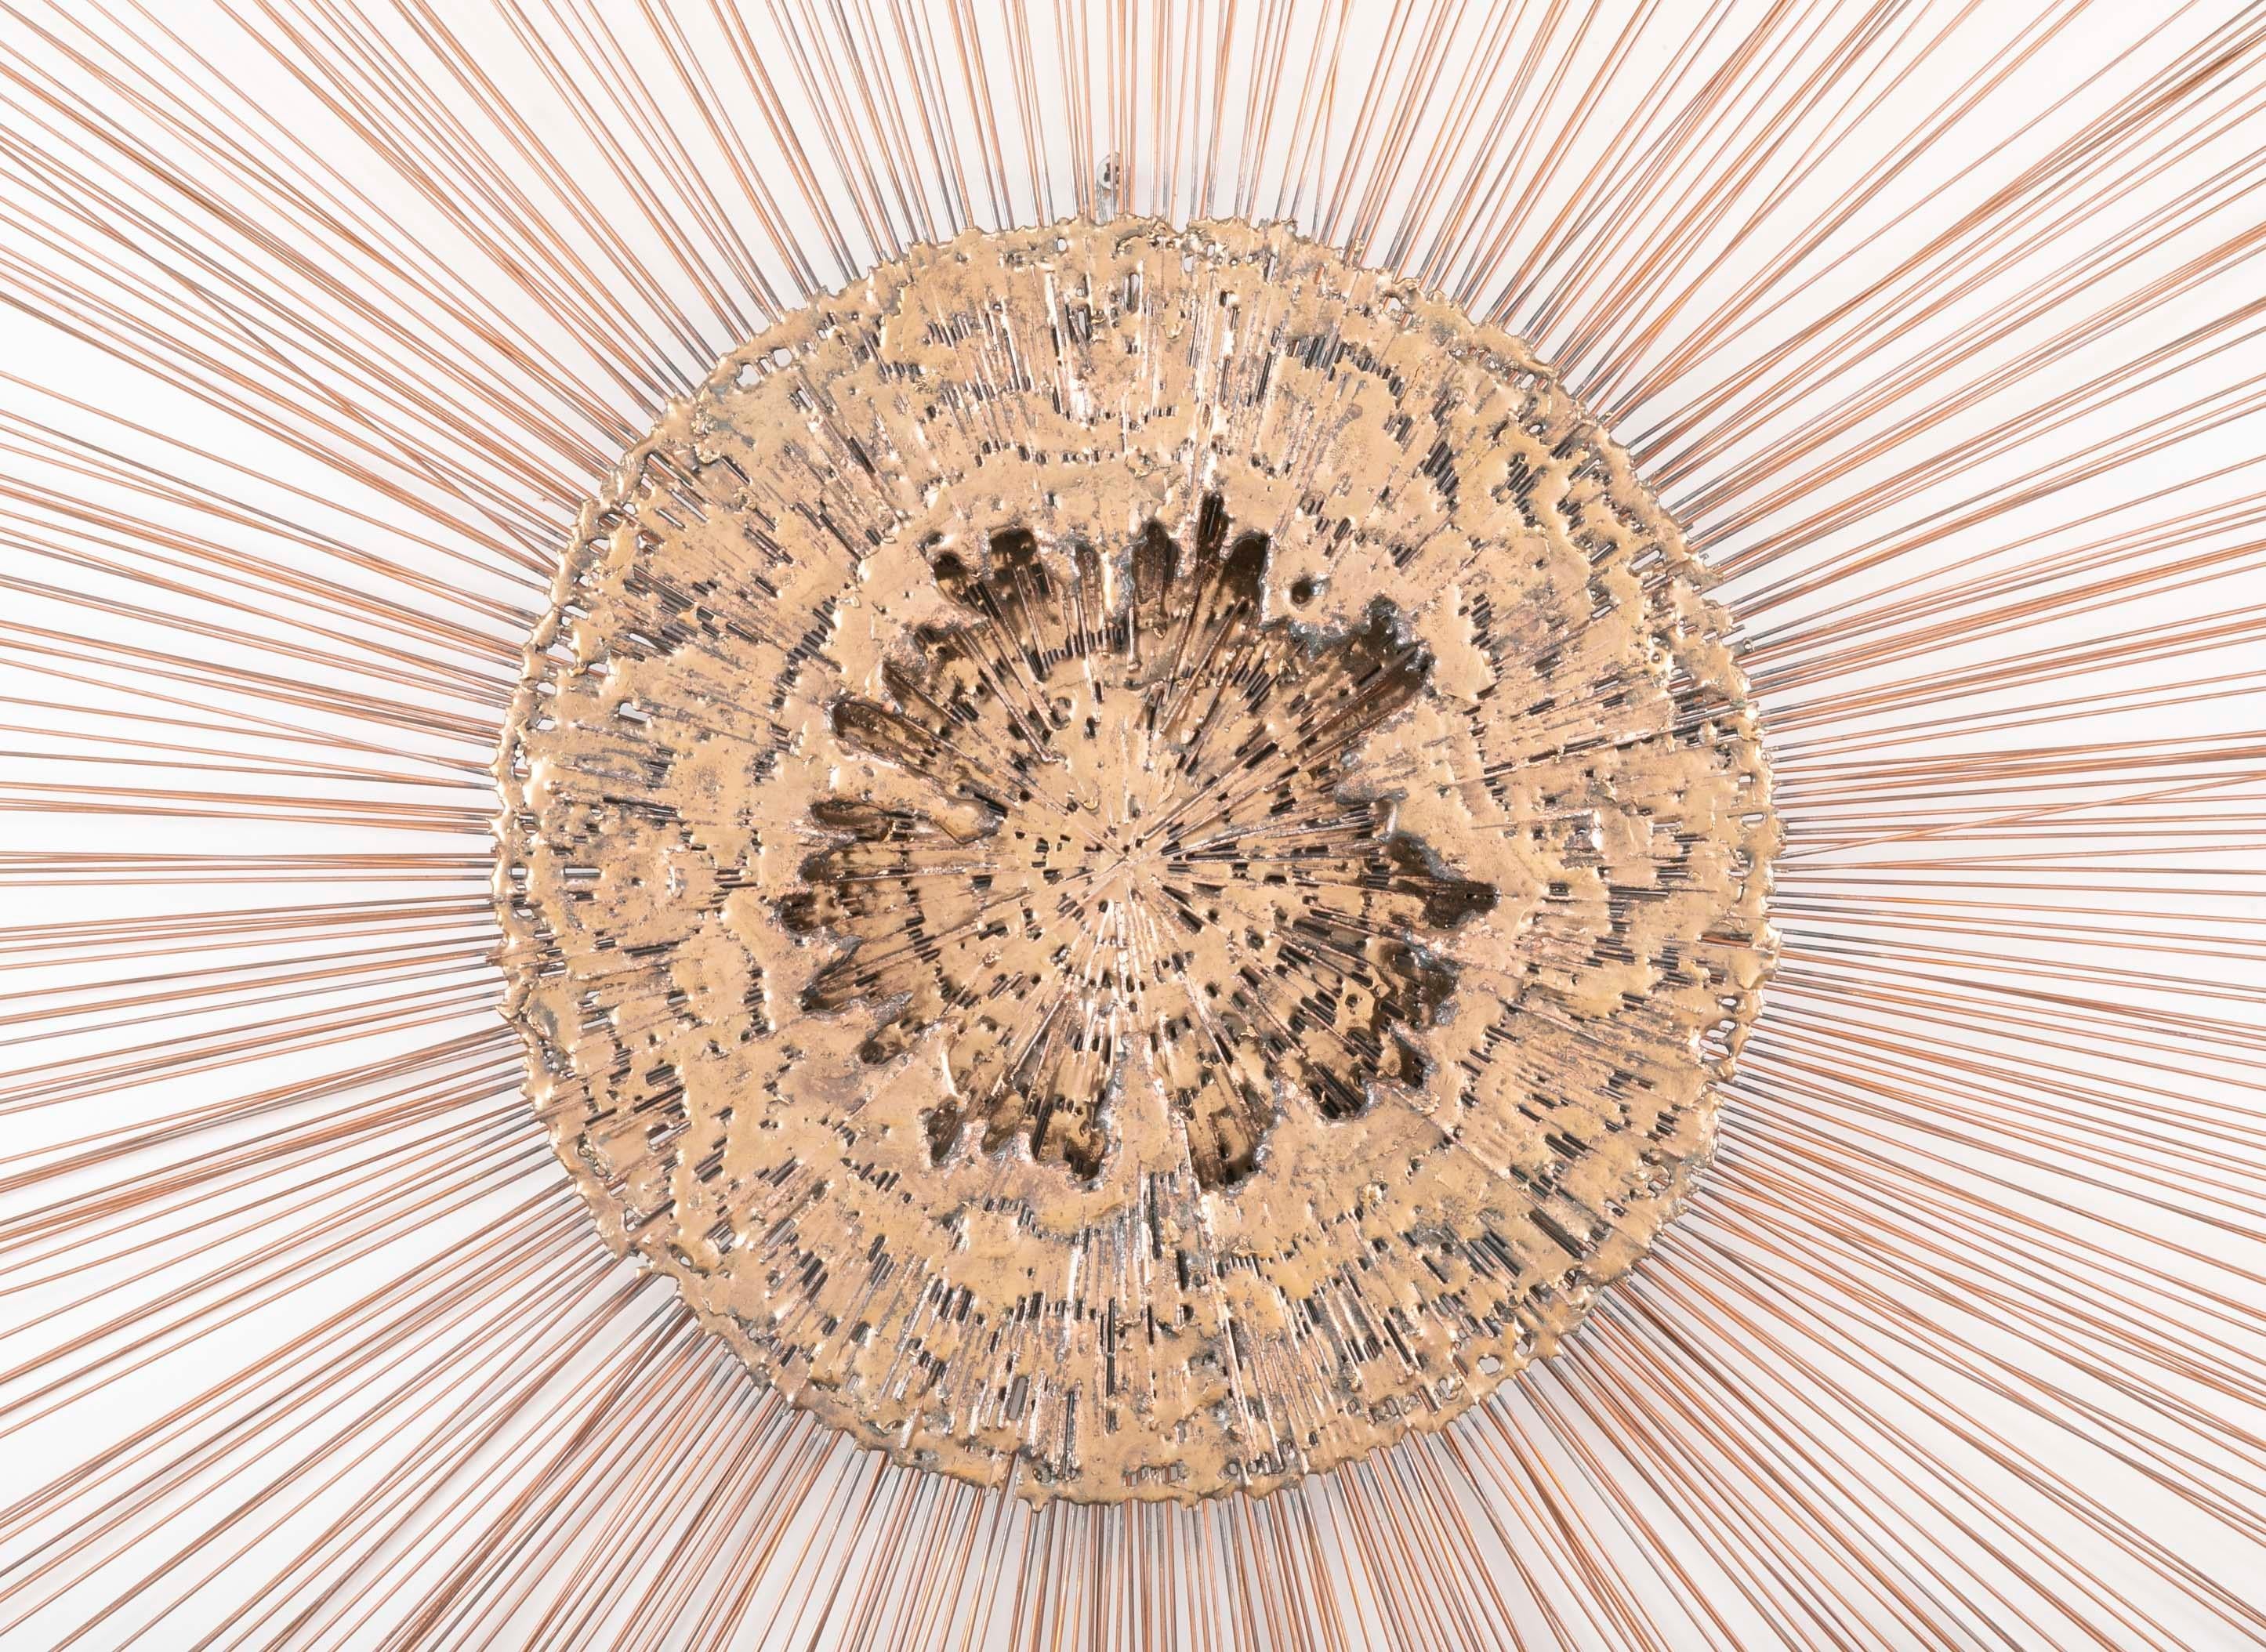 A stunning monumental 1970s starburst wall hanging with a textured 'molten' bronze central medallion surrounded by protruding copper rods. It brings to mind an exploding star, a supernova. Great scale at 42 inches diameter. In the style and of the